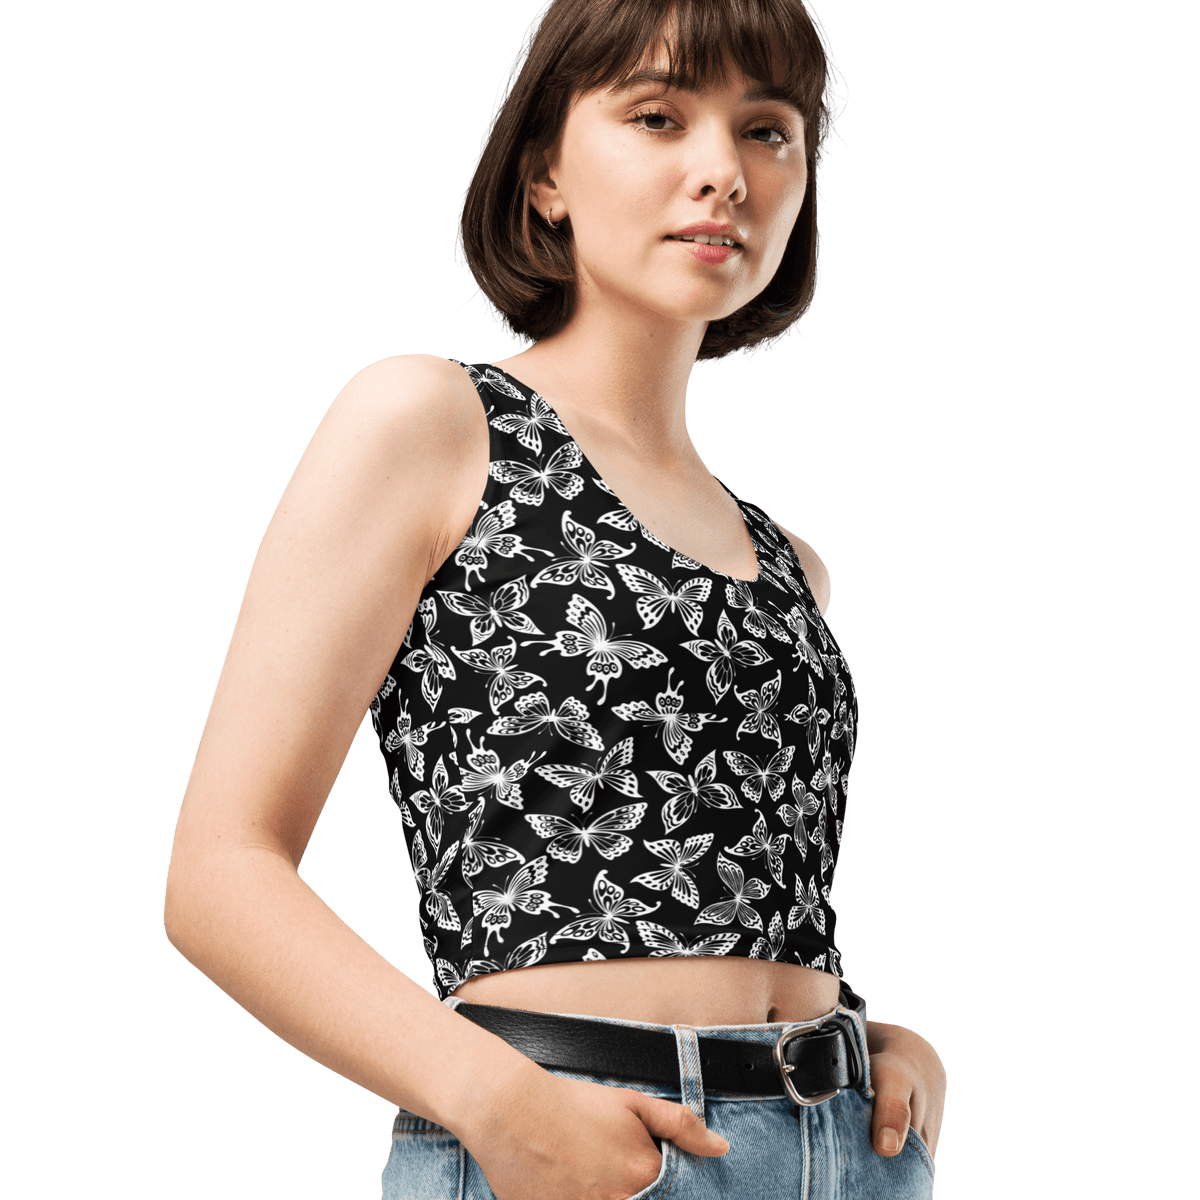 Butterfly Crop Top, Crop Top Women, Cute Crop Top, Crop Top, Cami, Aesthetic, Butterfly, Tee, Blouse, Y2K, Gift for her, Gift for mom